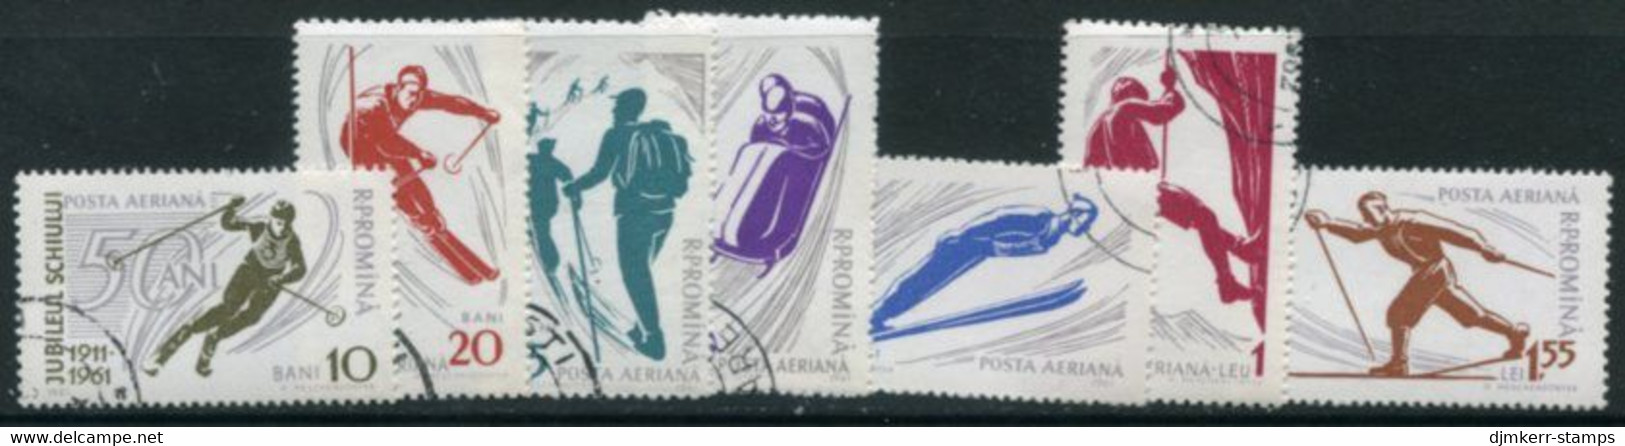 ROMANIA 1961 Winter Sports Perforated Used.  Michel 1951-57 - Oblitérés